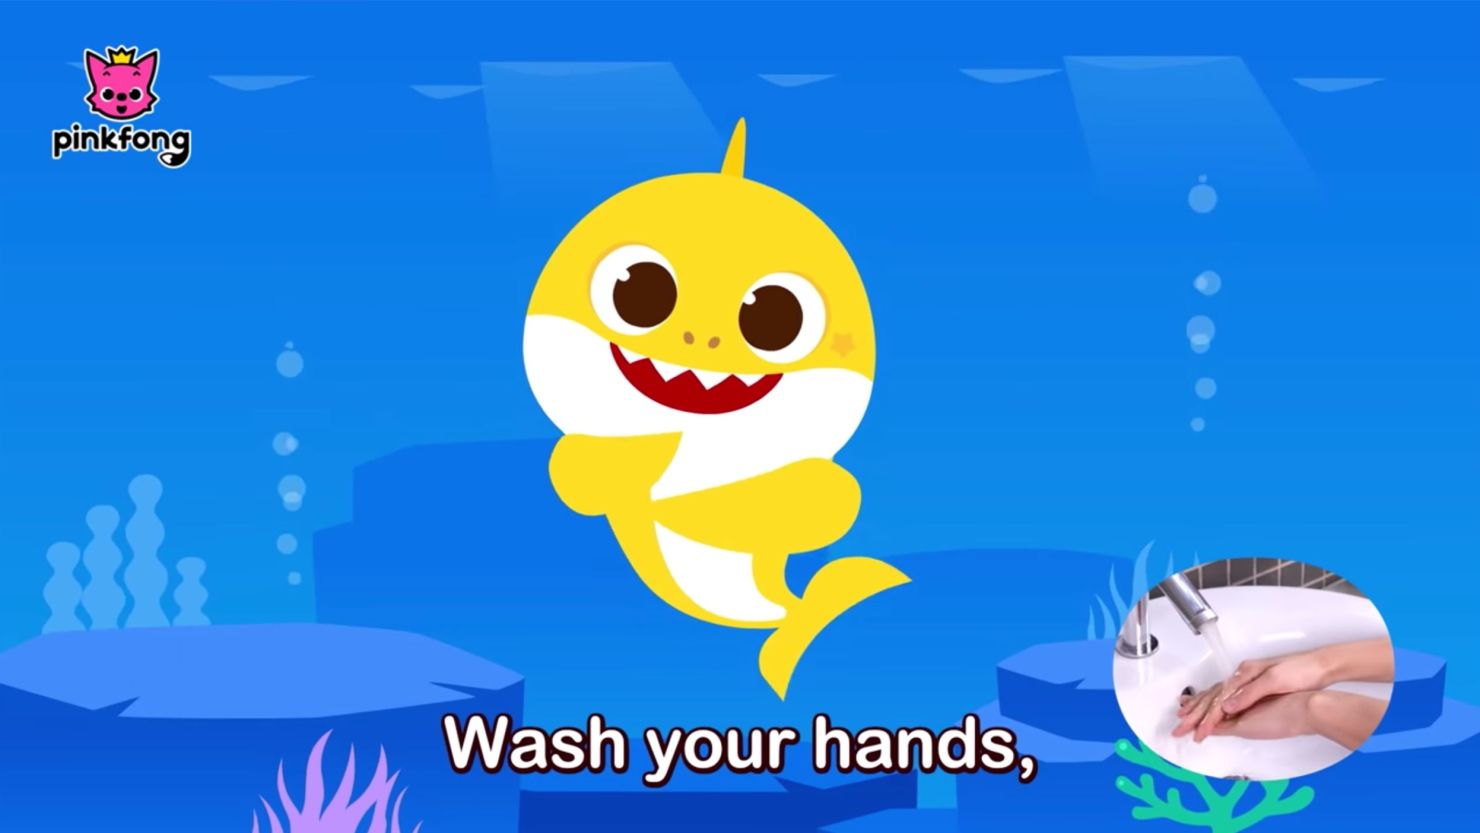 Pinkfong released a new "Baby Shark" tune to help us wash our hands.